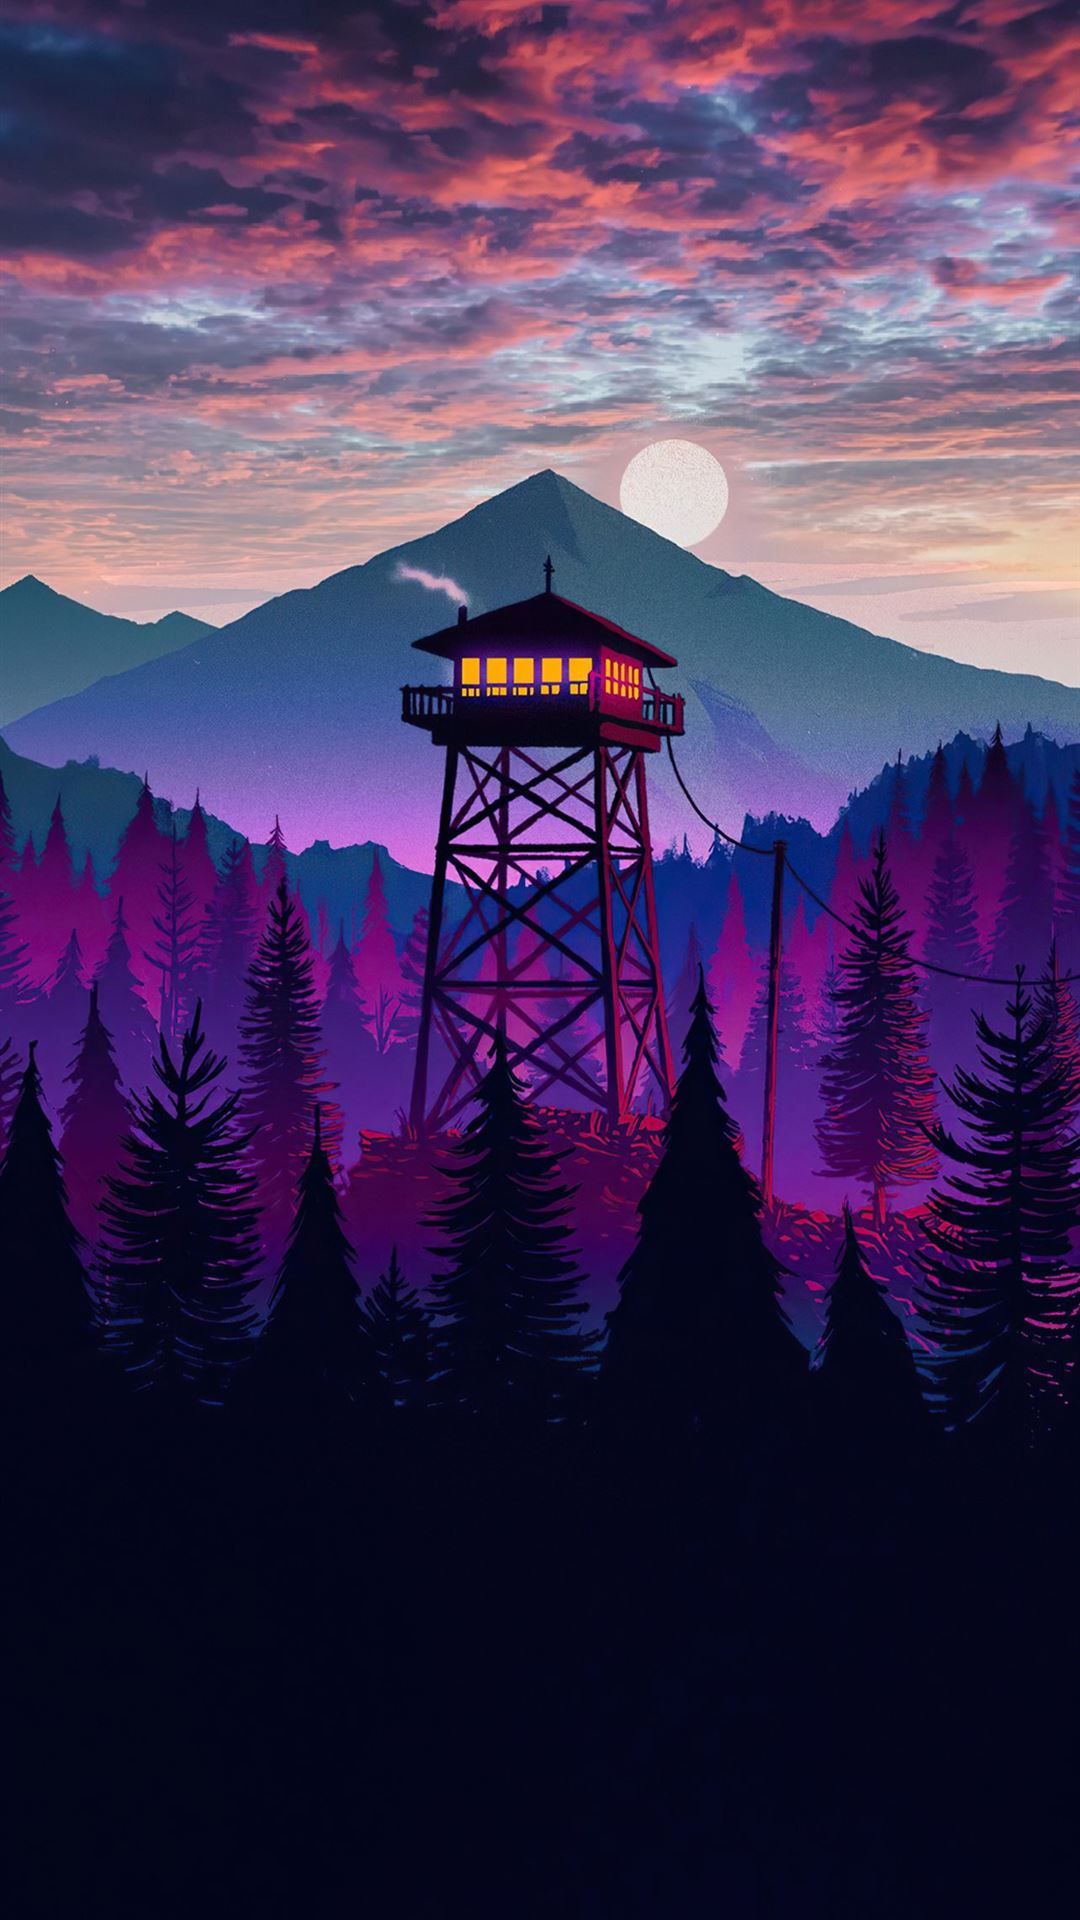 A tower with trees and mountains in the background - Landscape